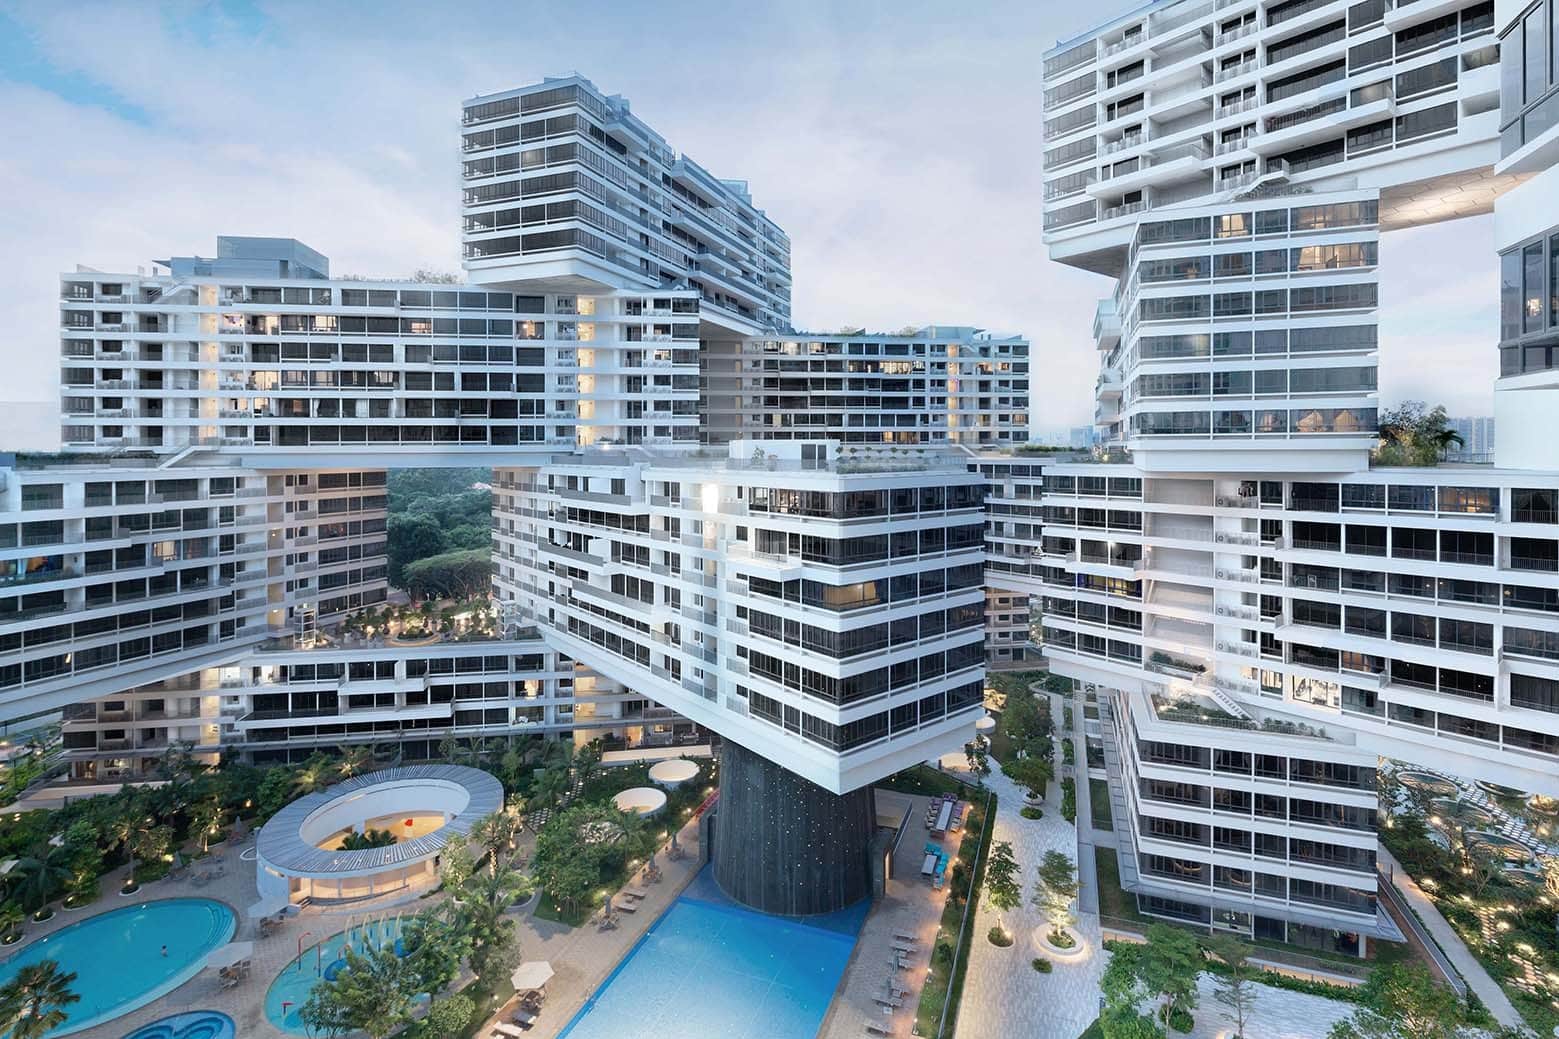 List Of Architects in Singapore